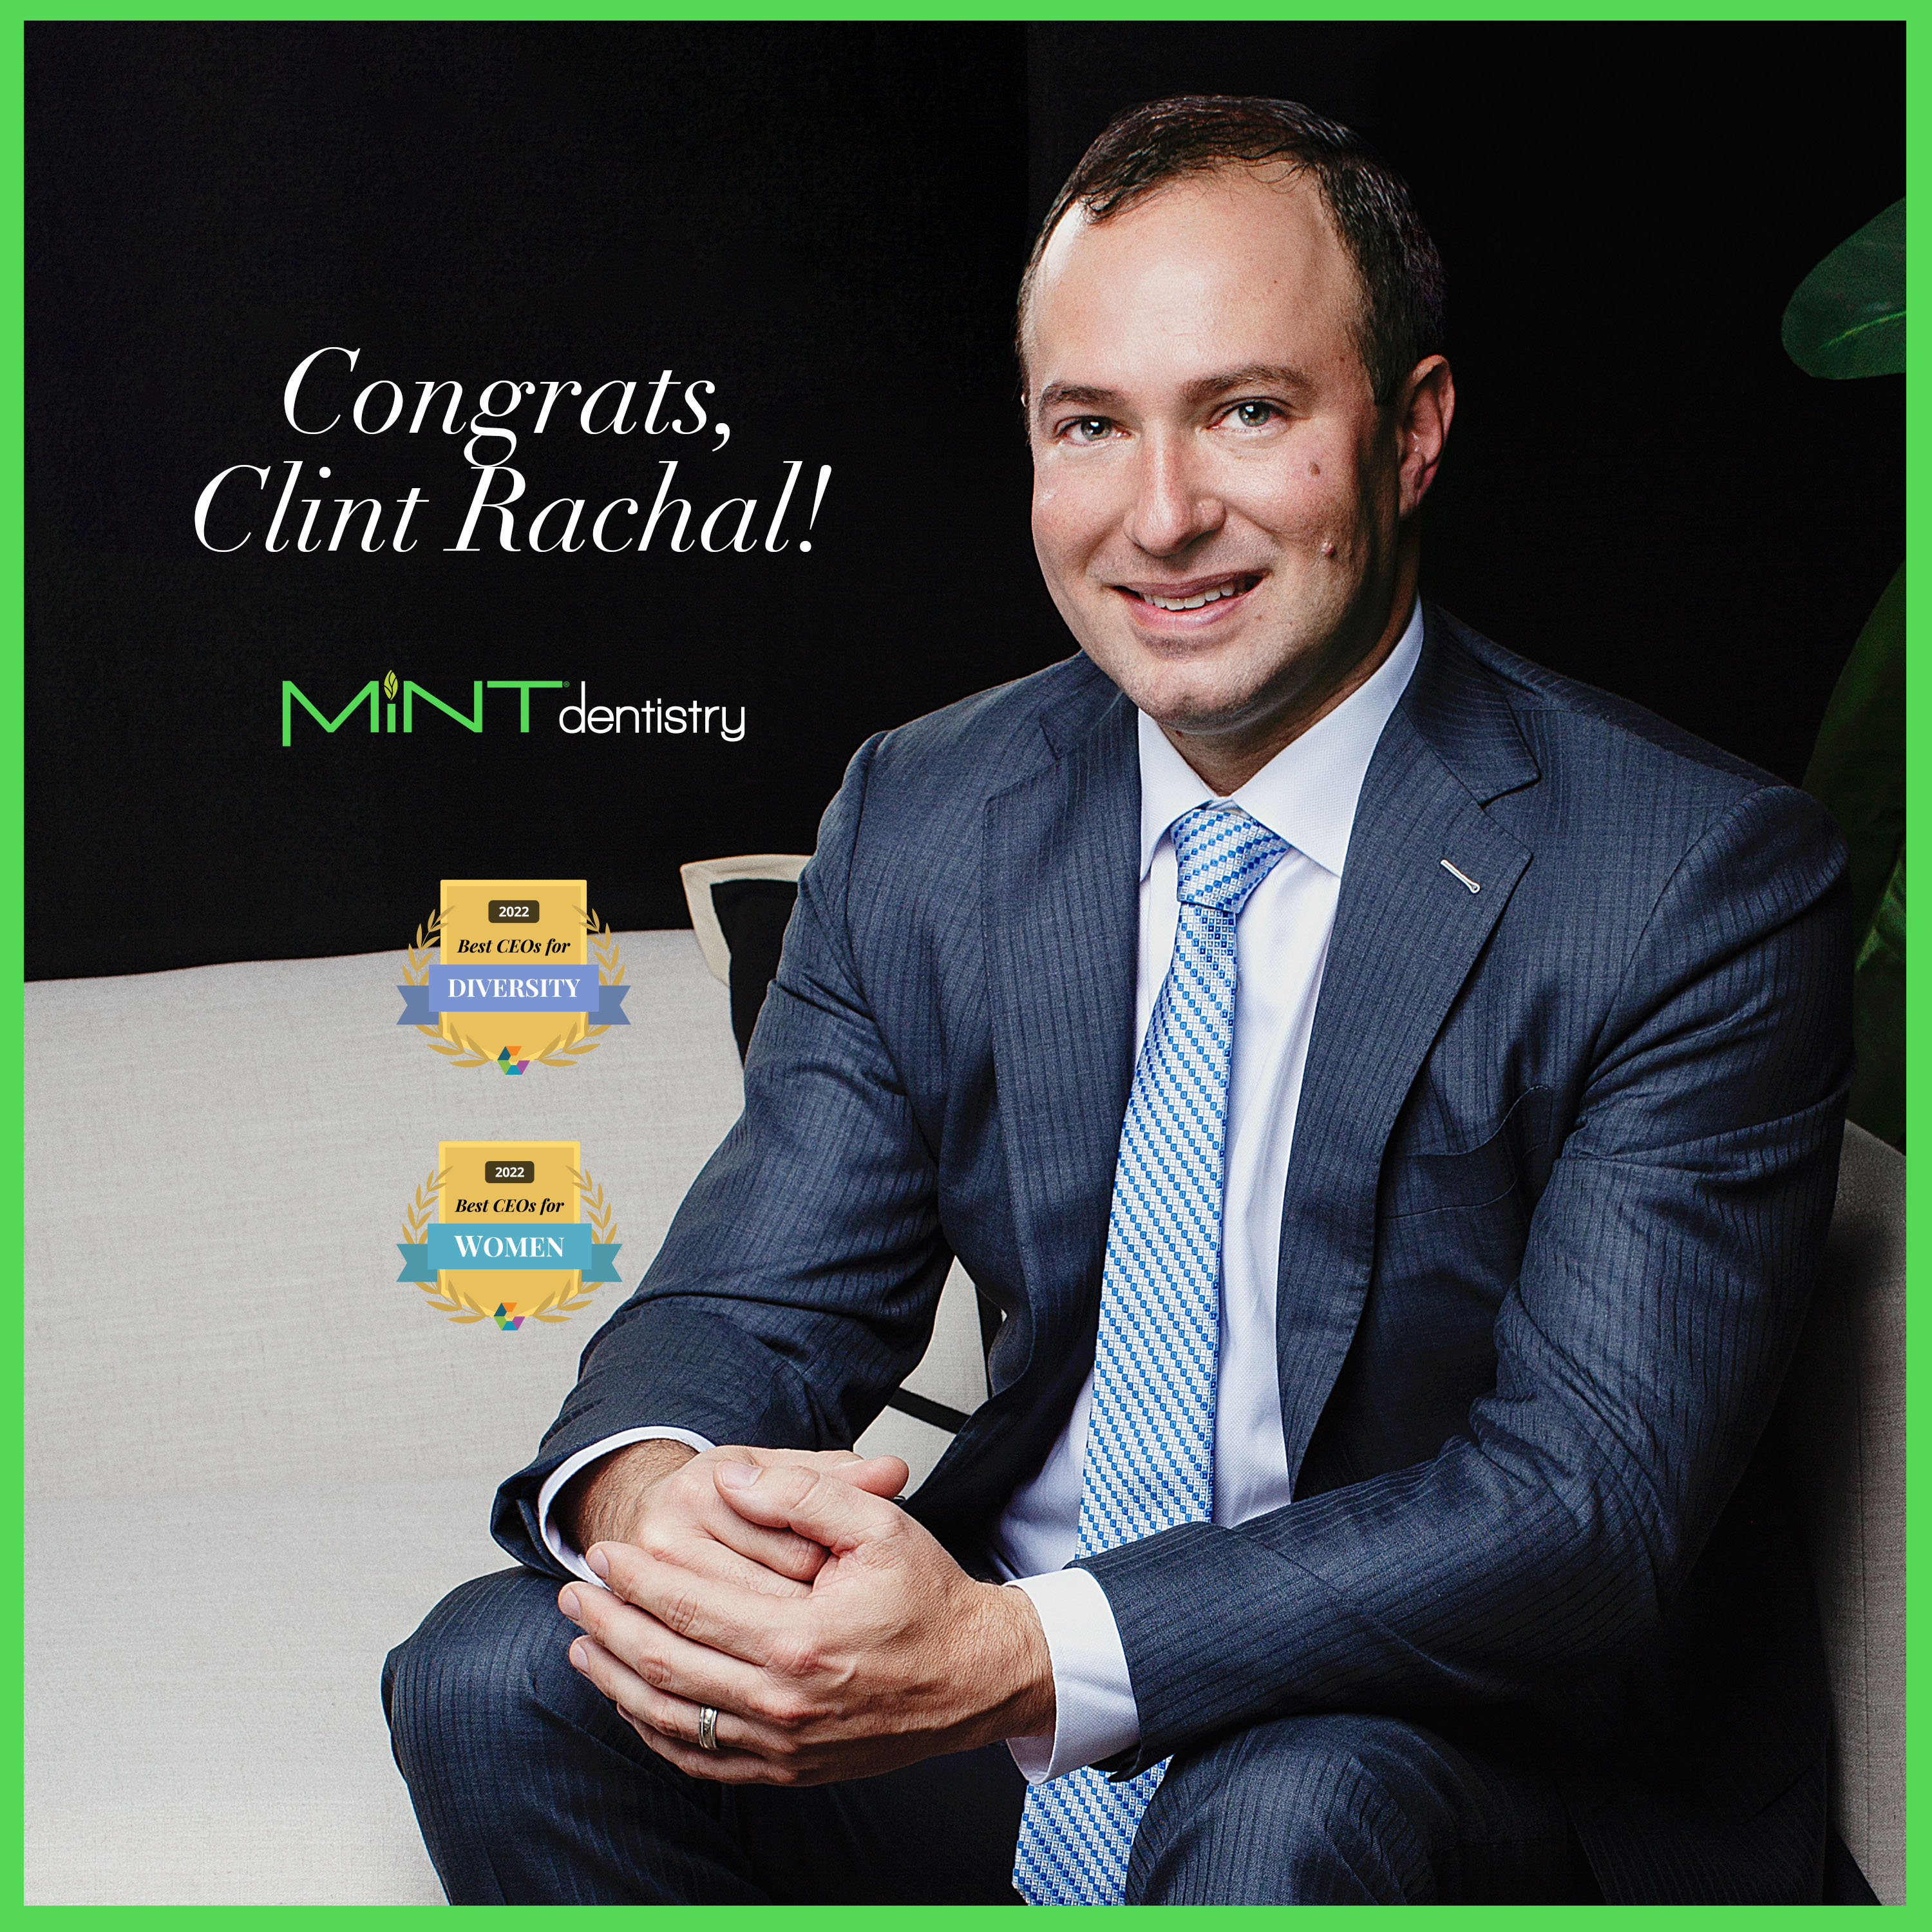 Clint Rachal, CEO of MINT dentistry